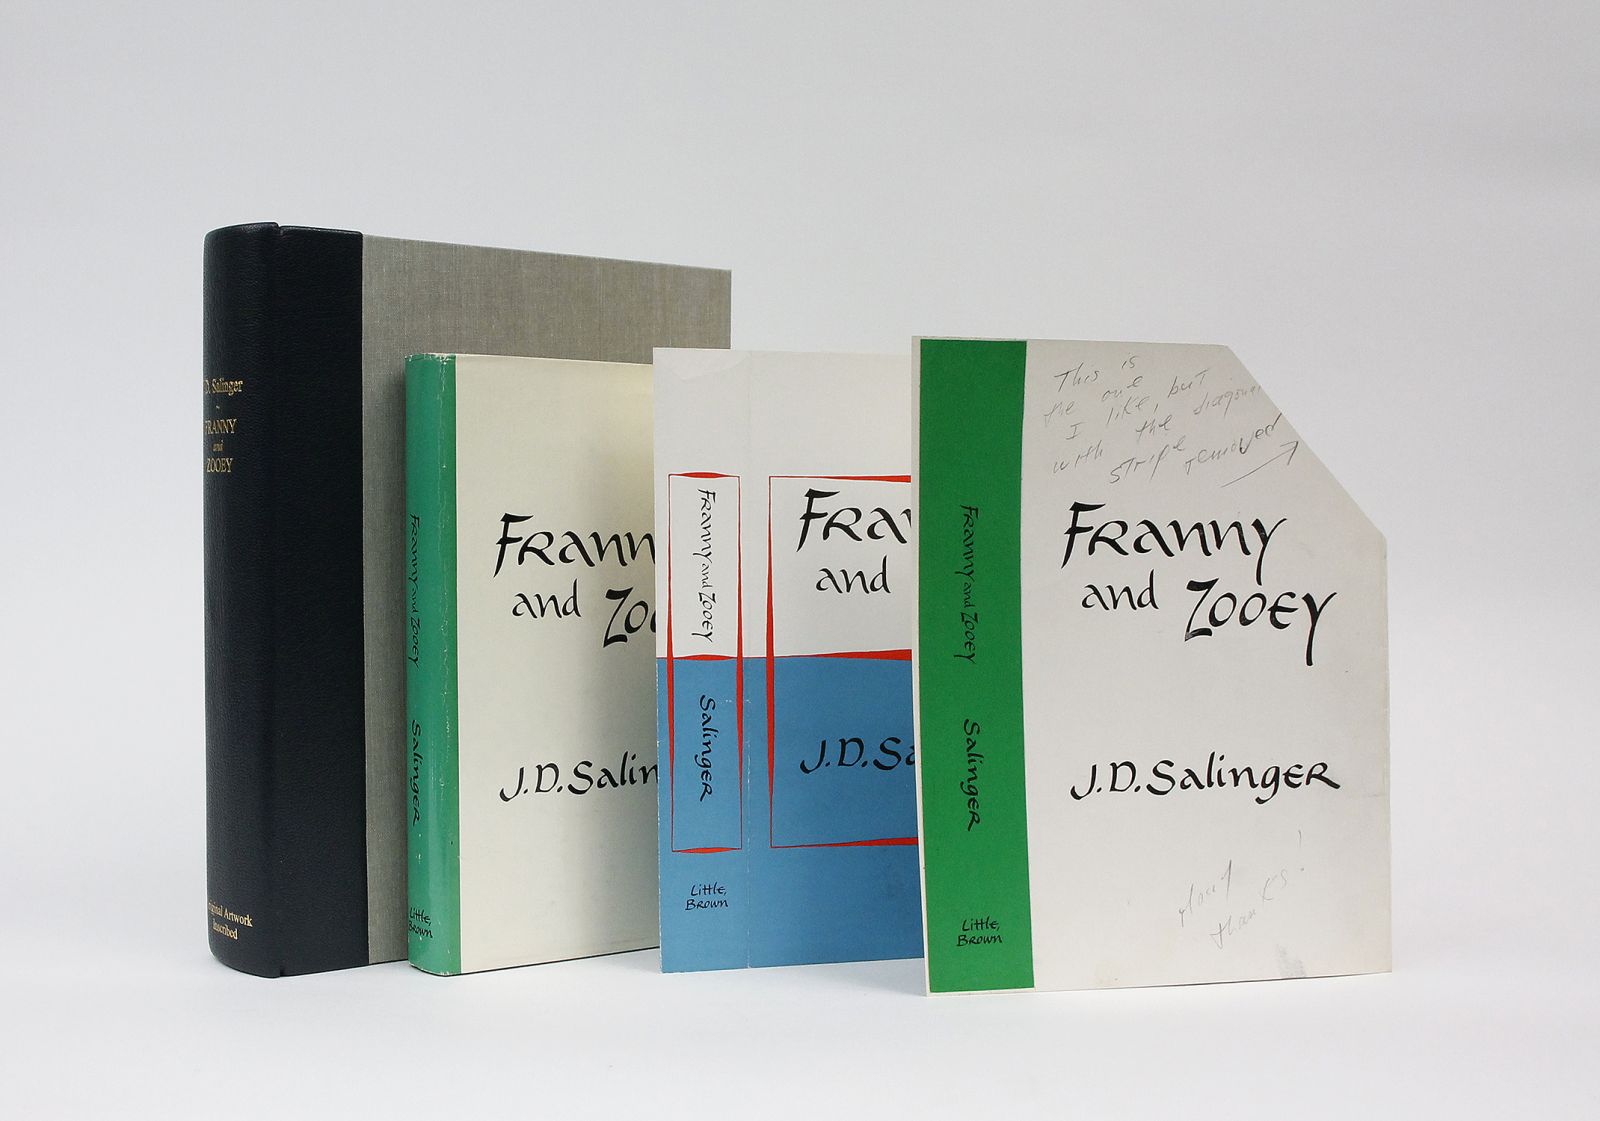 FRANNY AND ZOOEY - Original Dustwrapper Artwork - INSCRIBED BY THE AUTHOR. -  image 5